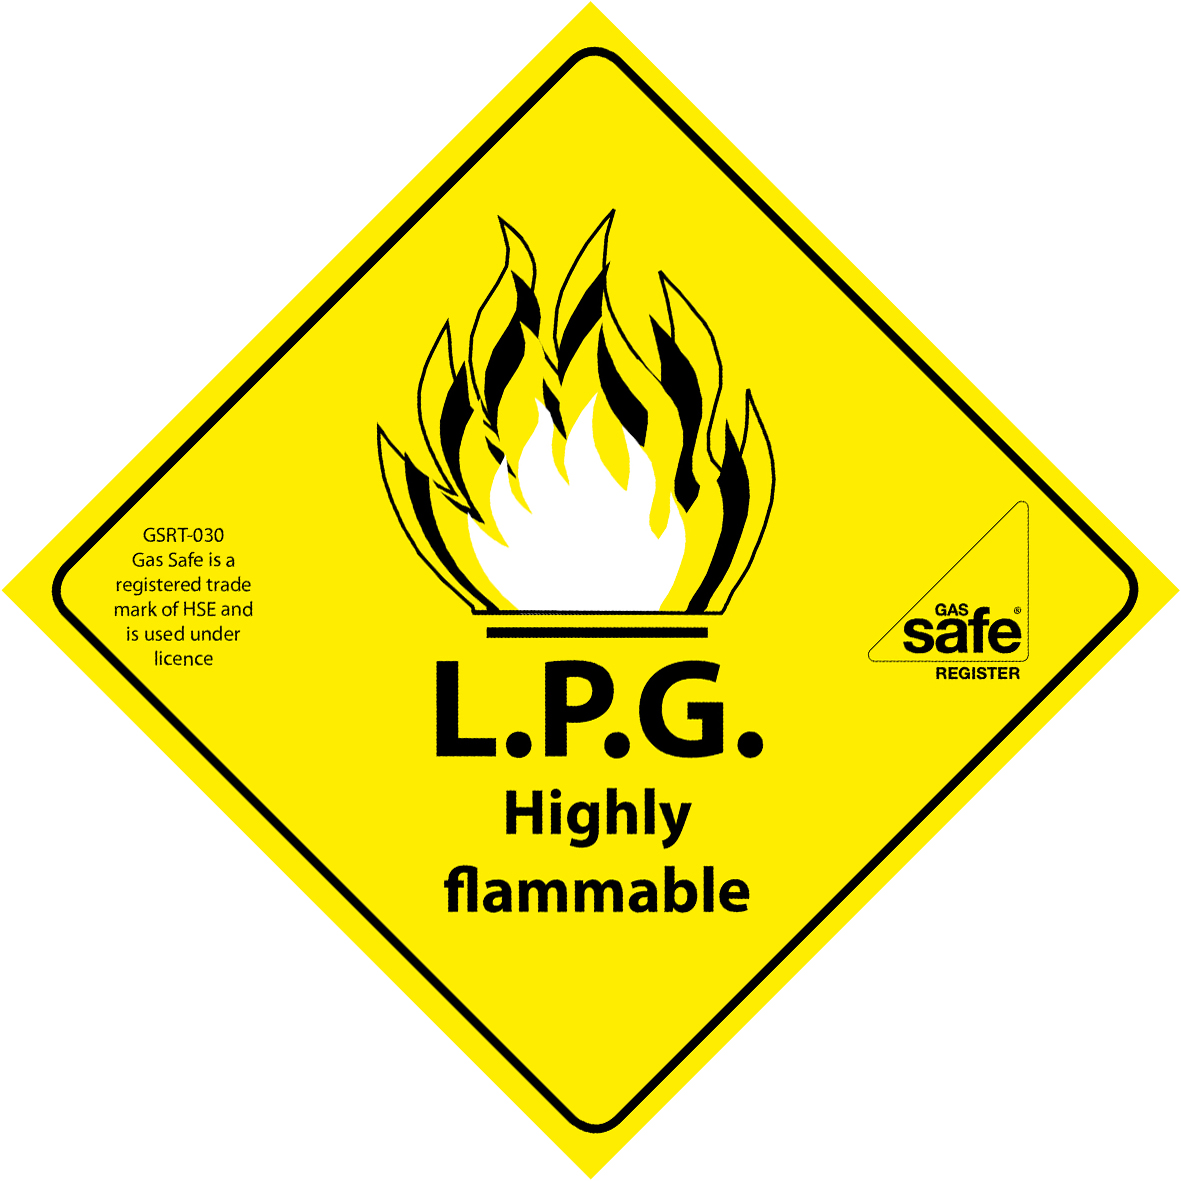 Gas Safe L.P.G. Highly Flammable Labels - Gas Safety Shop